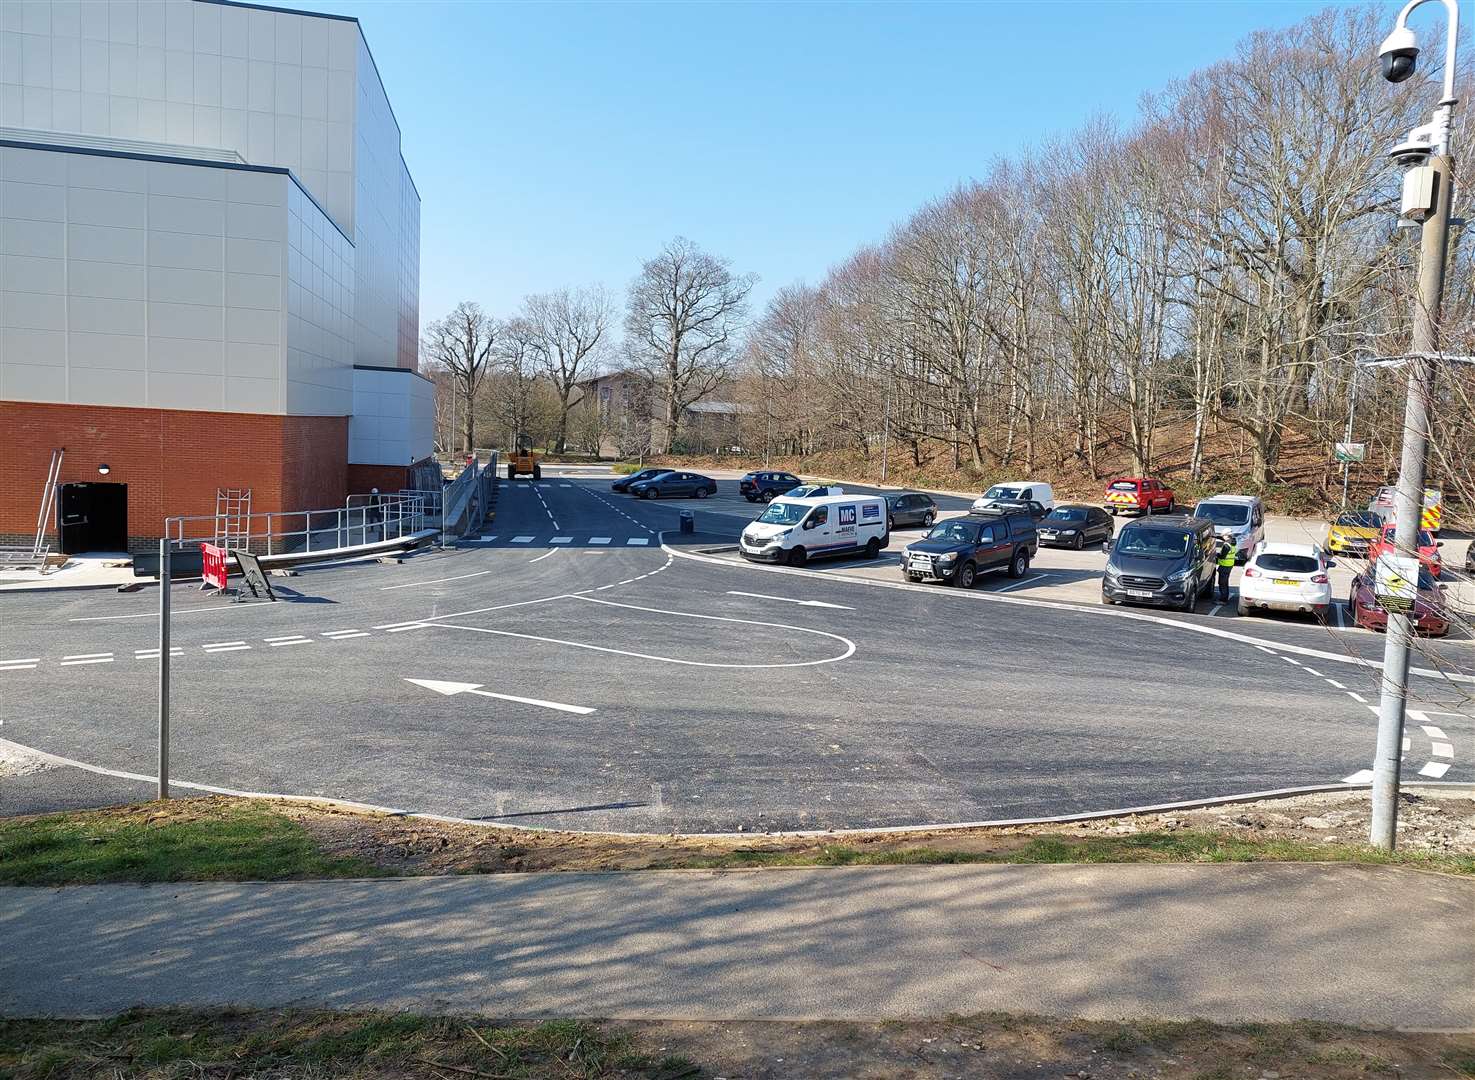 New tarmac has been laid in the car park to the side of Cineworld